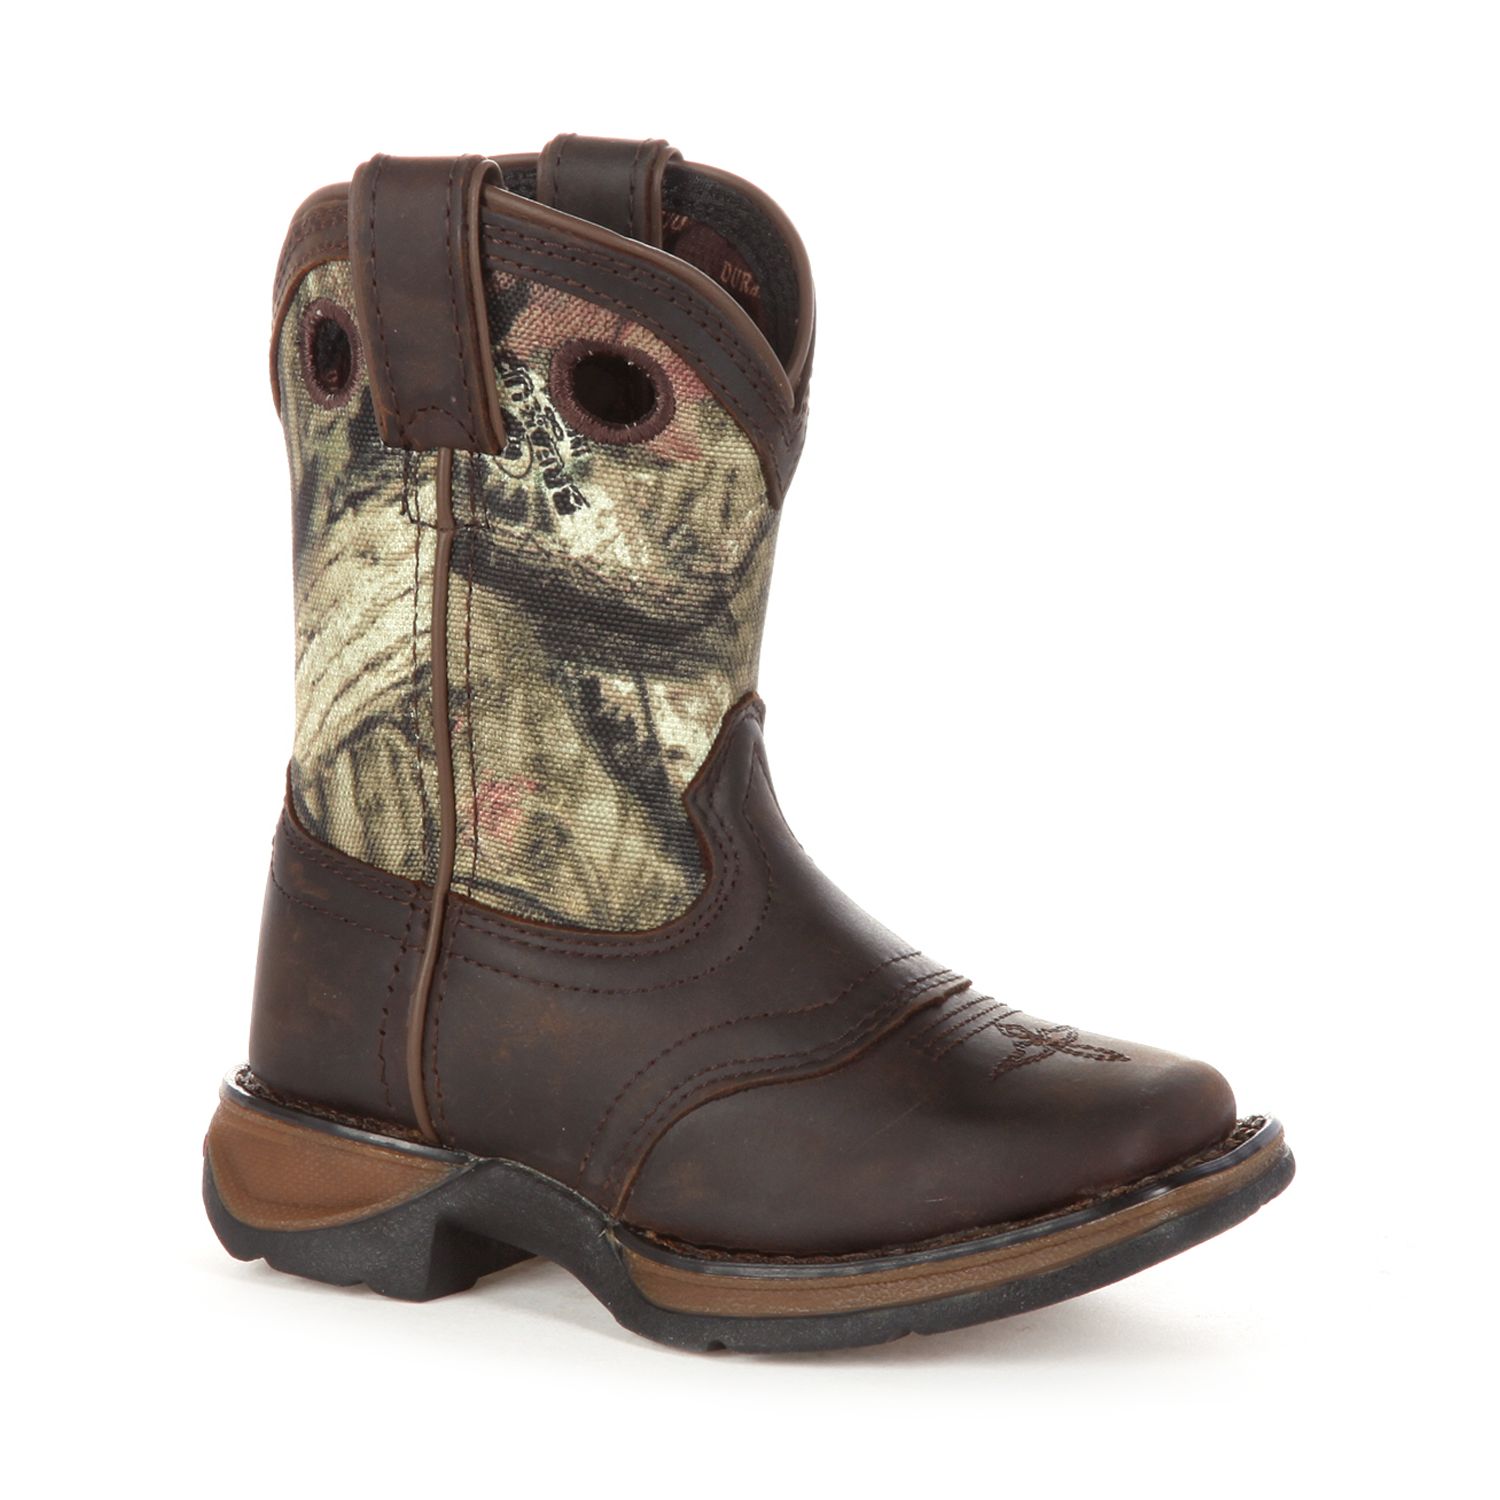 Image for Durango Lil Sadle Toddler Camouflage Western Boots at Kohl's.